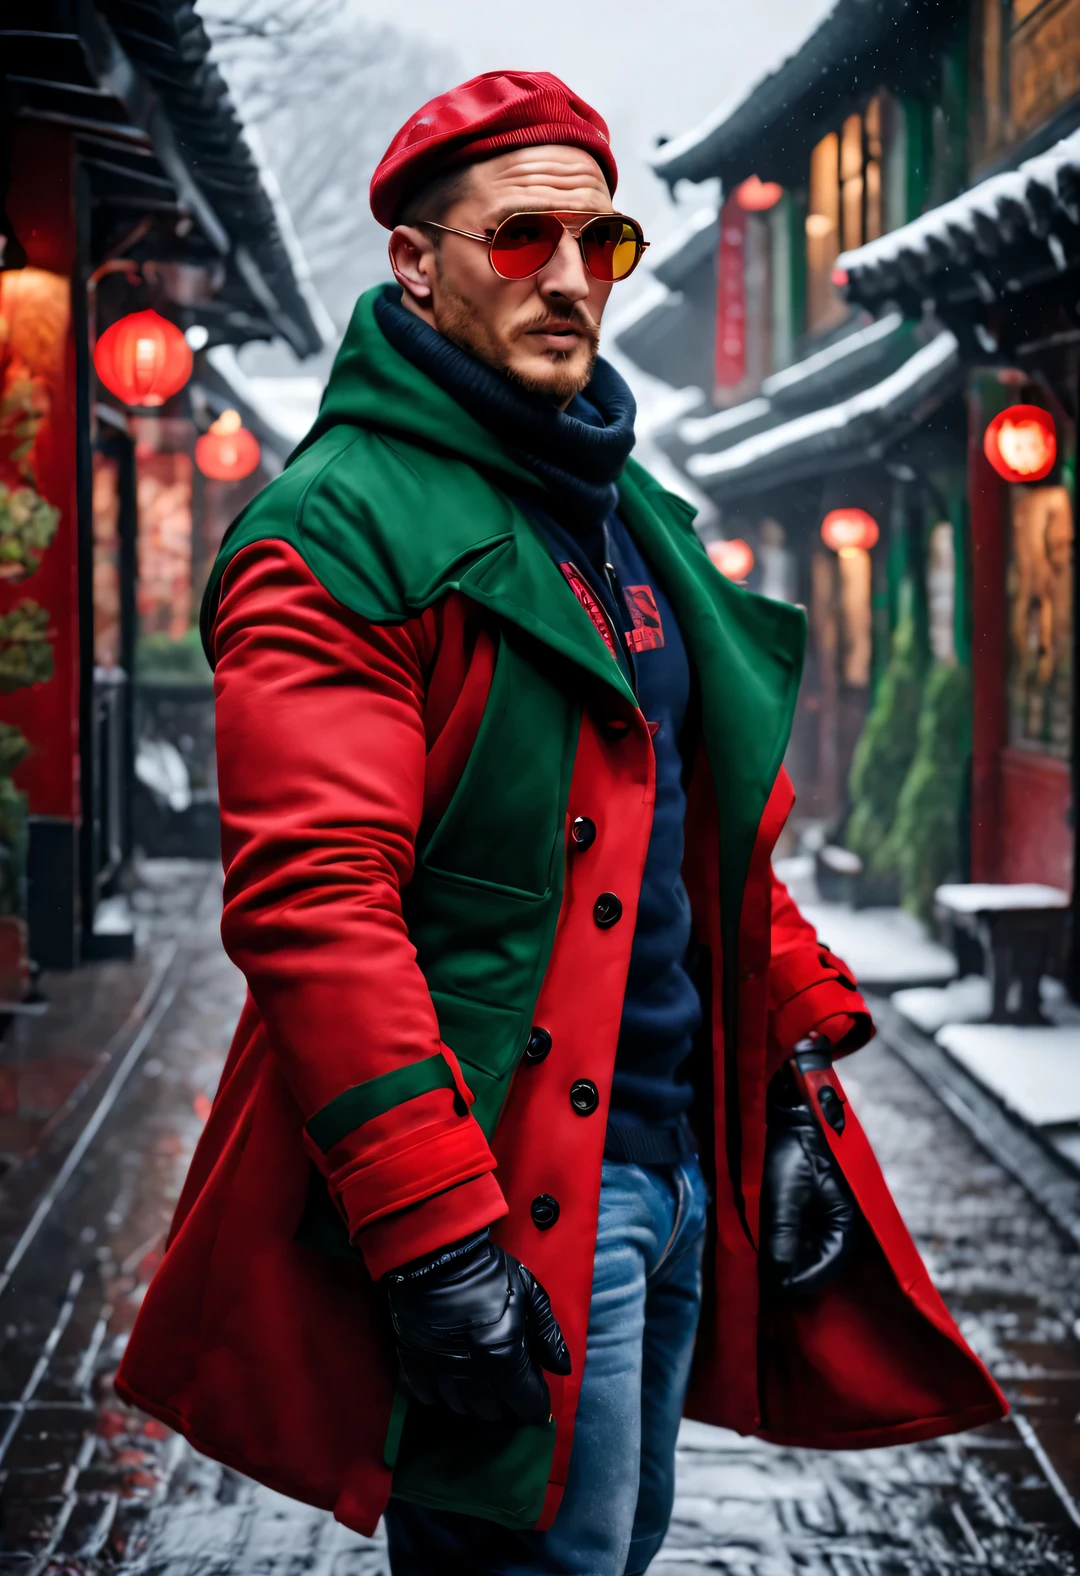 red stormtrooper, Playful new fashion style, Tall and fit male model Tom Hardy wears a thick red and green peony tweed cotton coat: 1.34, (Gentlemanly manners), Embroidery Suzhou Embroidery Big Red Parka Snow Coat, (exceed) coat jacket, (duckbill cap, Black Sweater), jeans, (winter scarf warm scarf), gloves gloves, belt, Cotton boots, sunglasses, Combat boots, sports shoes, big photography,
background: Indoor T-shaped track, T-shaped platform, (snow),
depth of field, Ultra-clear, super high quality,